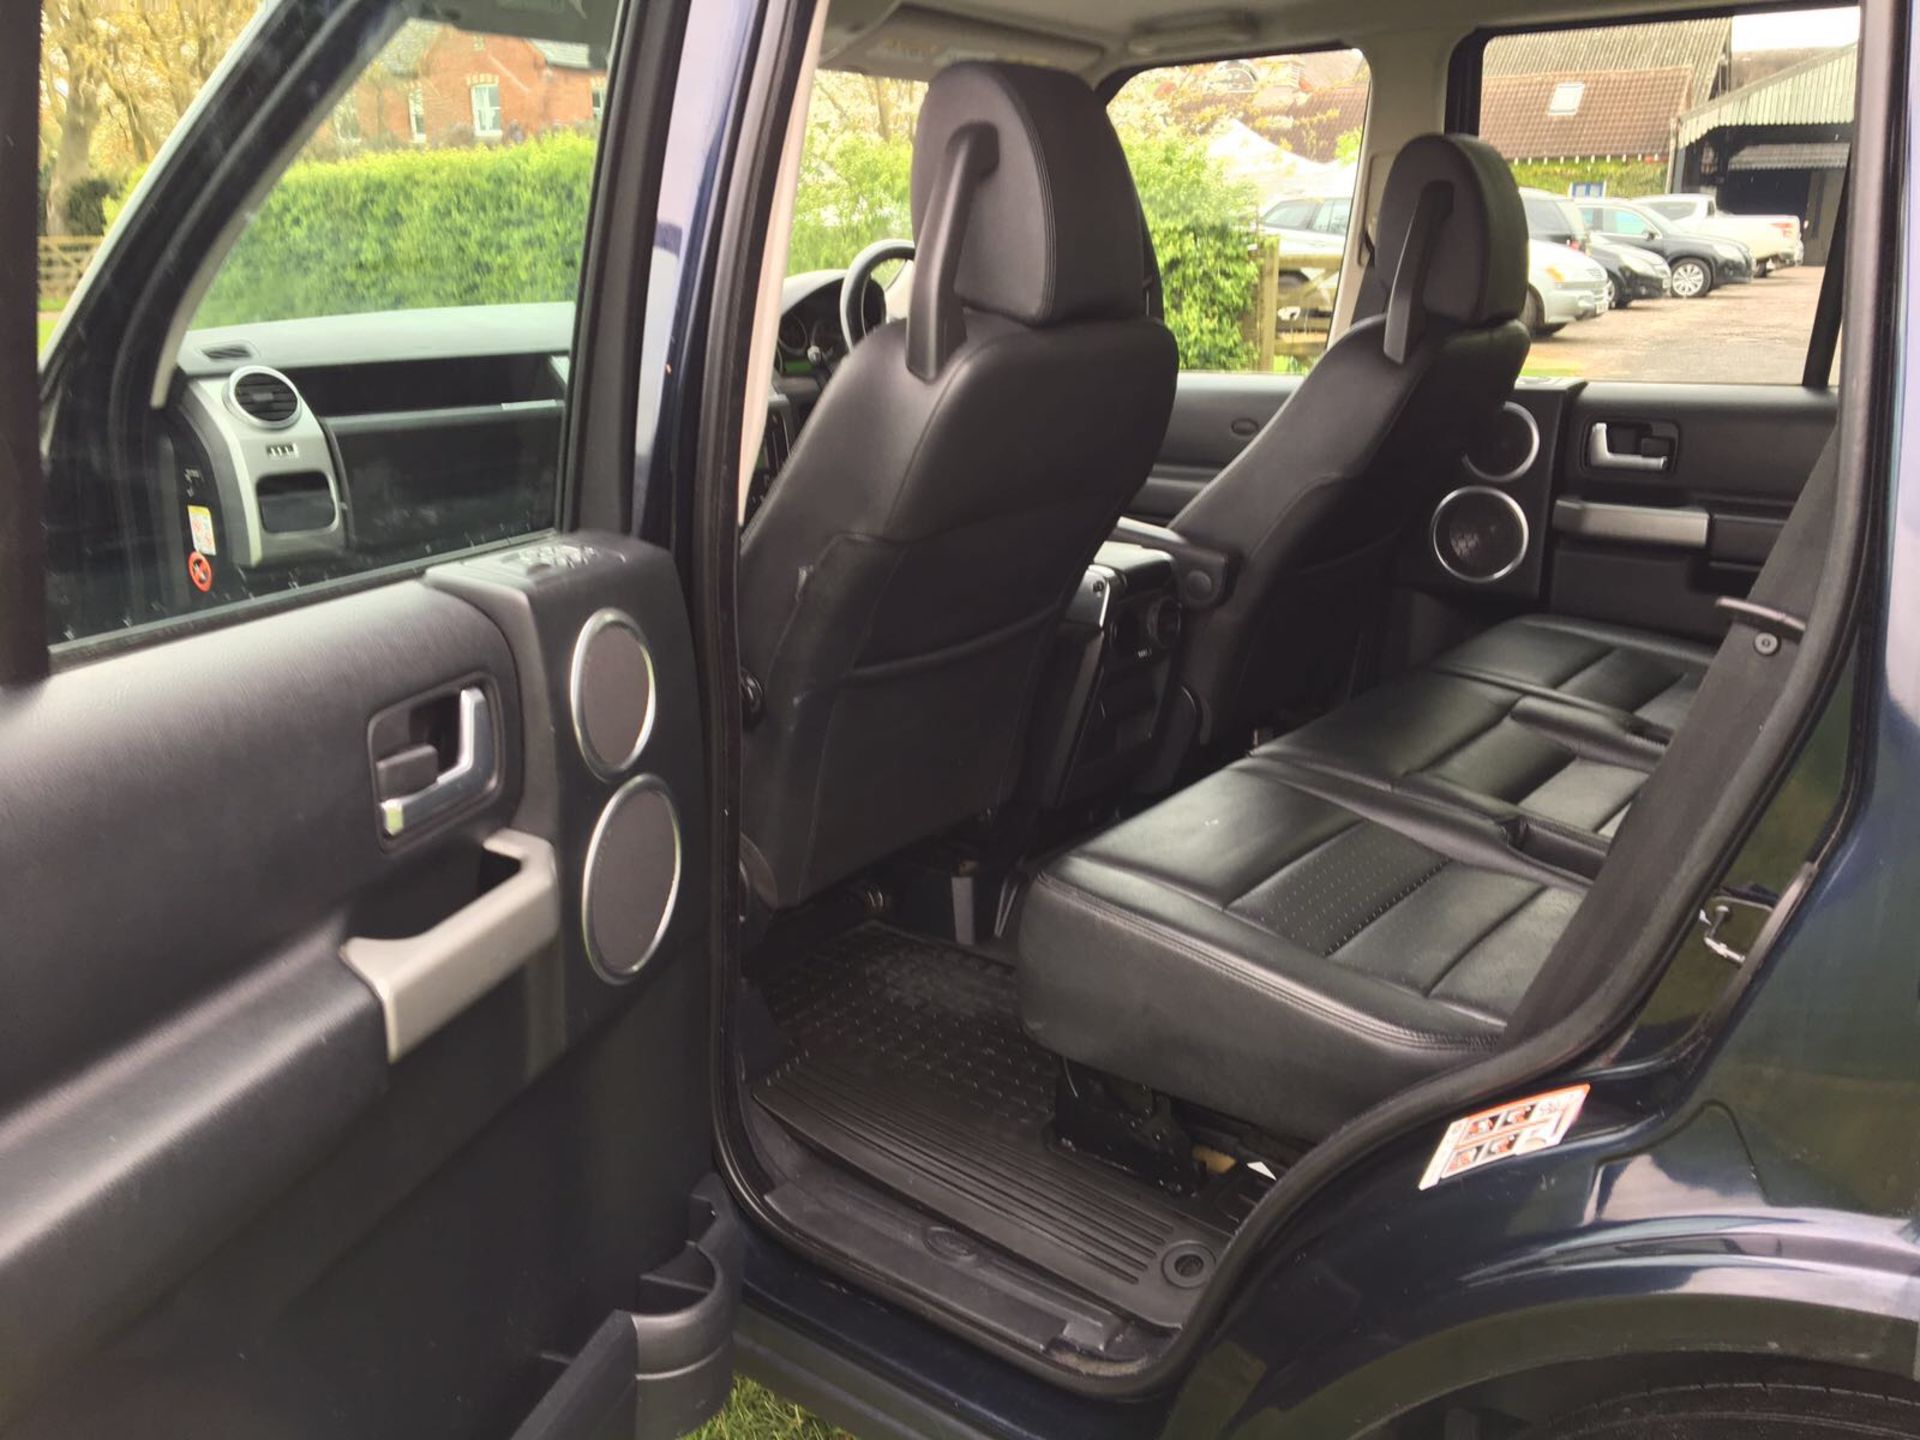 KB - 2007/57 REG LAND ROVER DISCOVERY 3 TDV6 SE AUTOMATIC, SAT NAV, AIR CON, HEATED SEATS ETC   DATE - Image 8 of 16